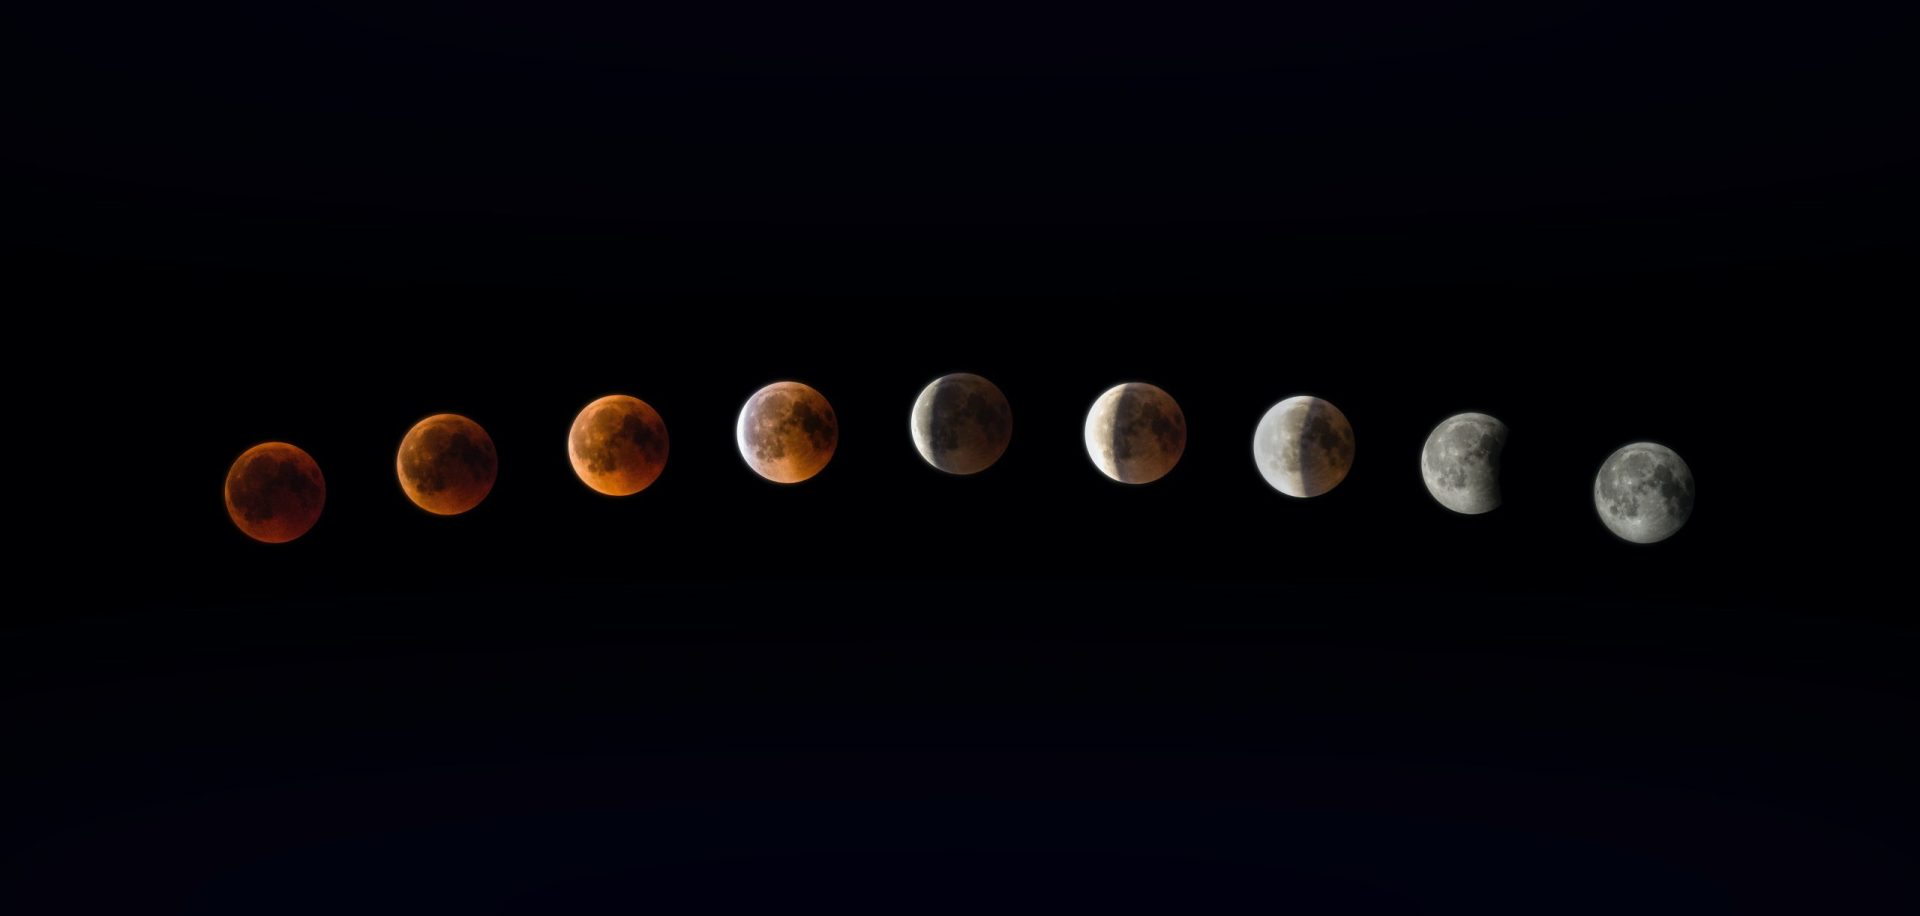 Preparing for May 2022 Lunar Eclipse